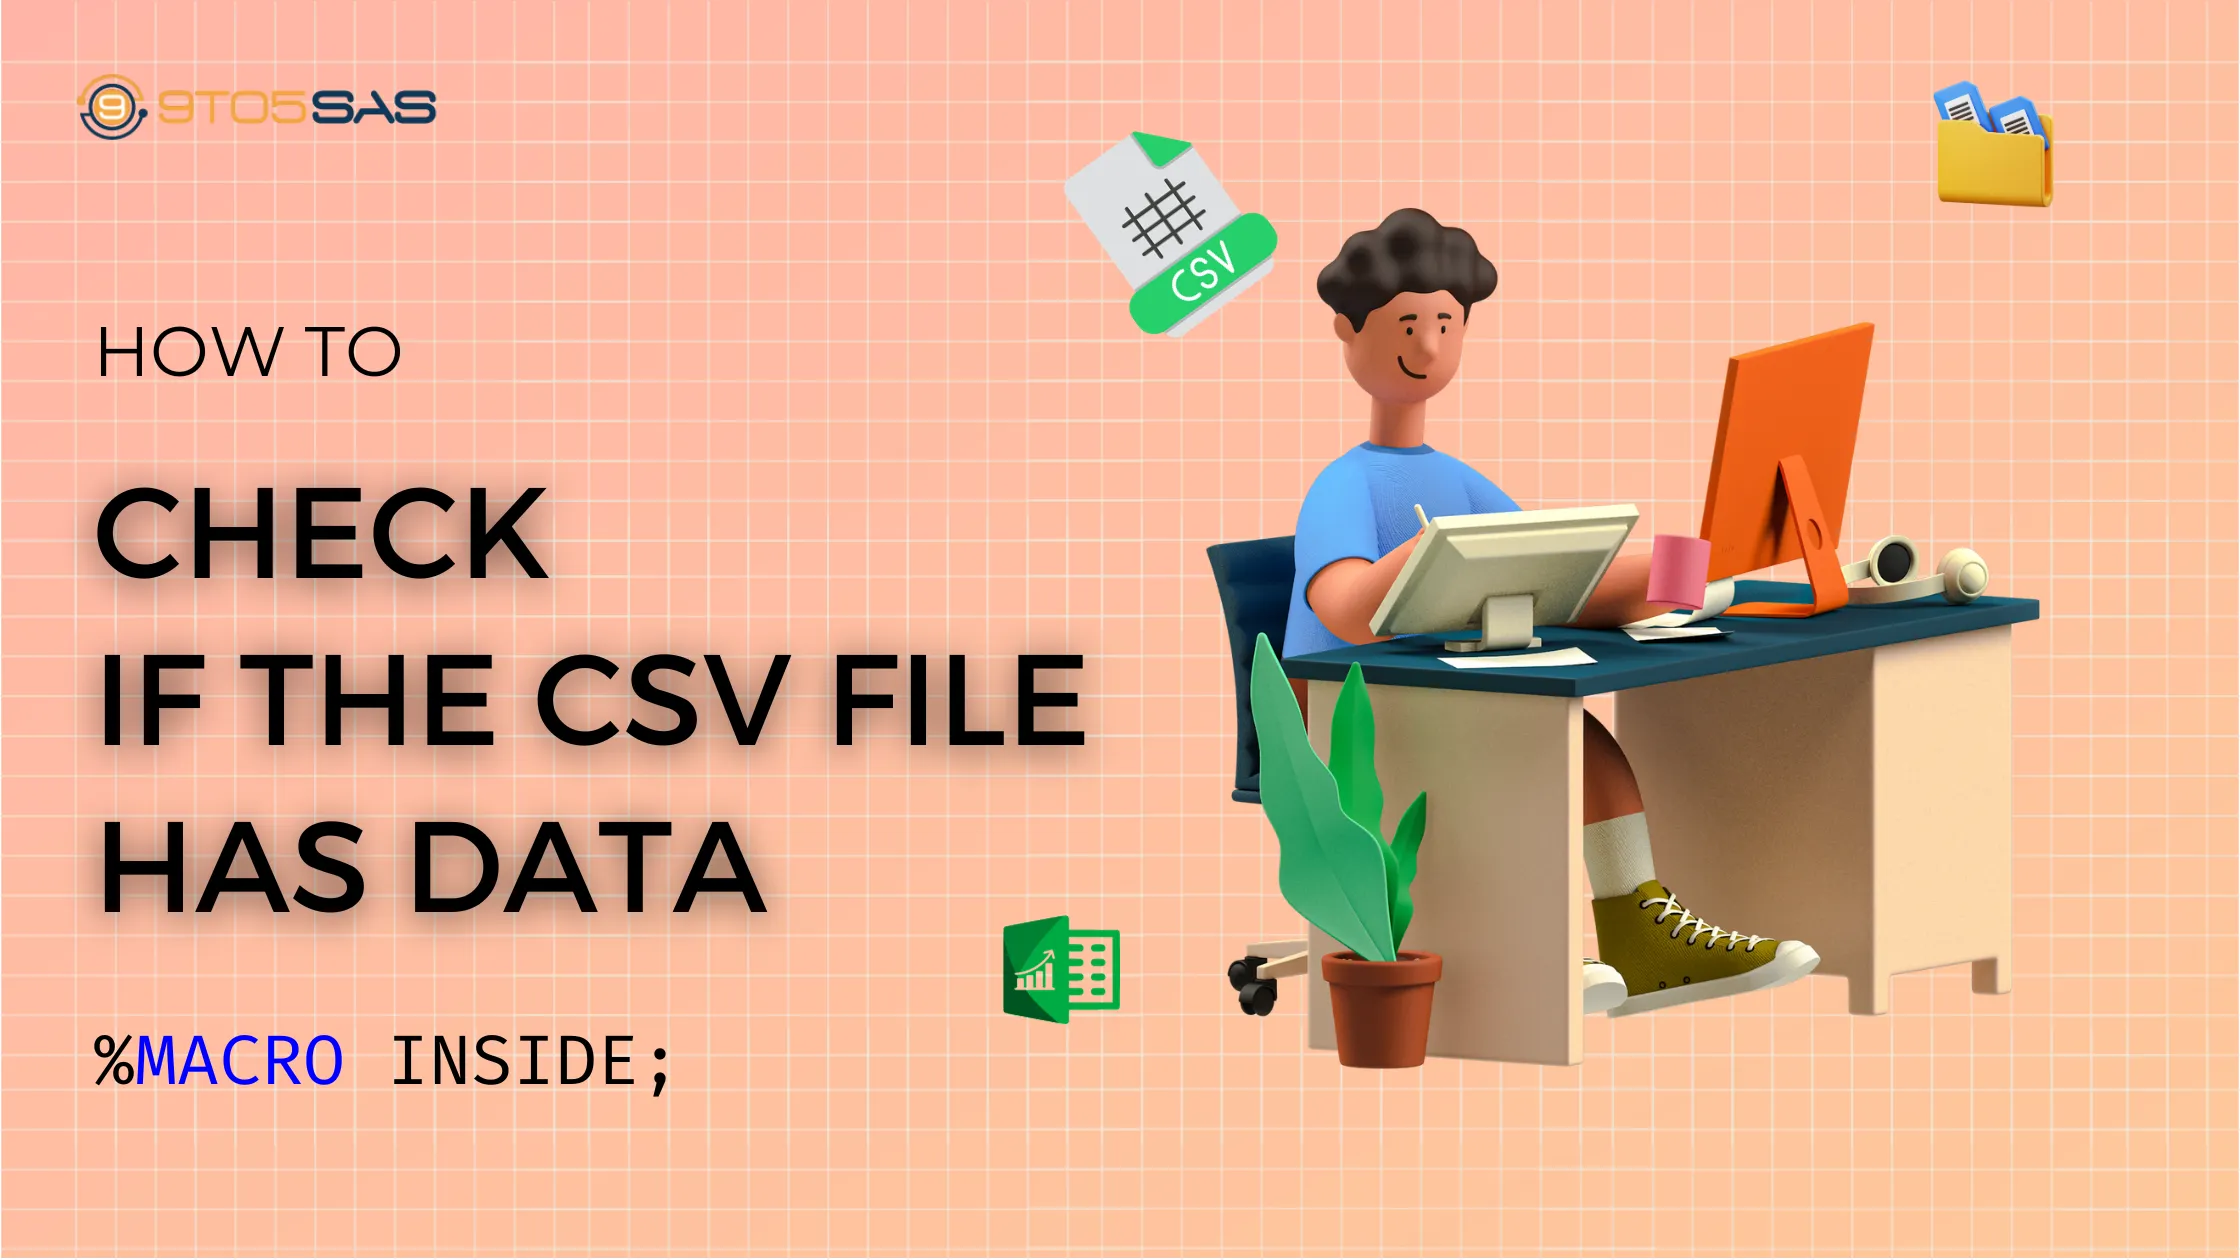 CHECK if the CSV file has data